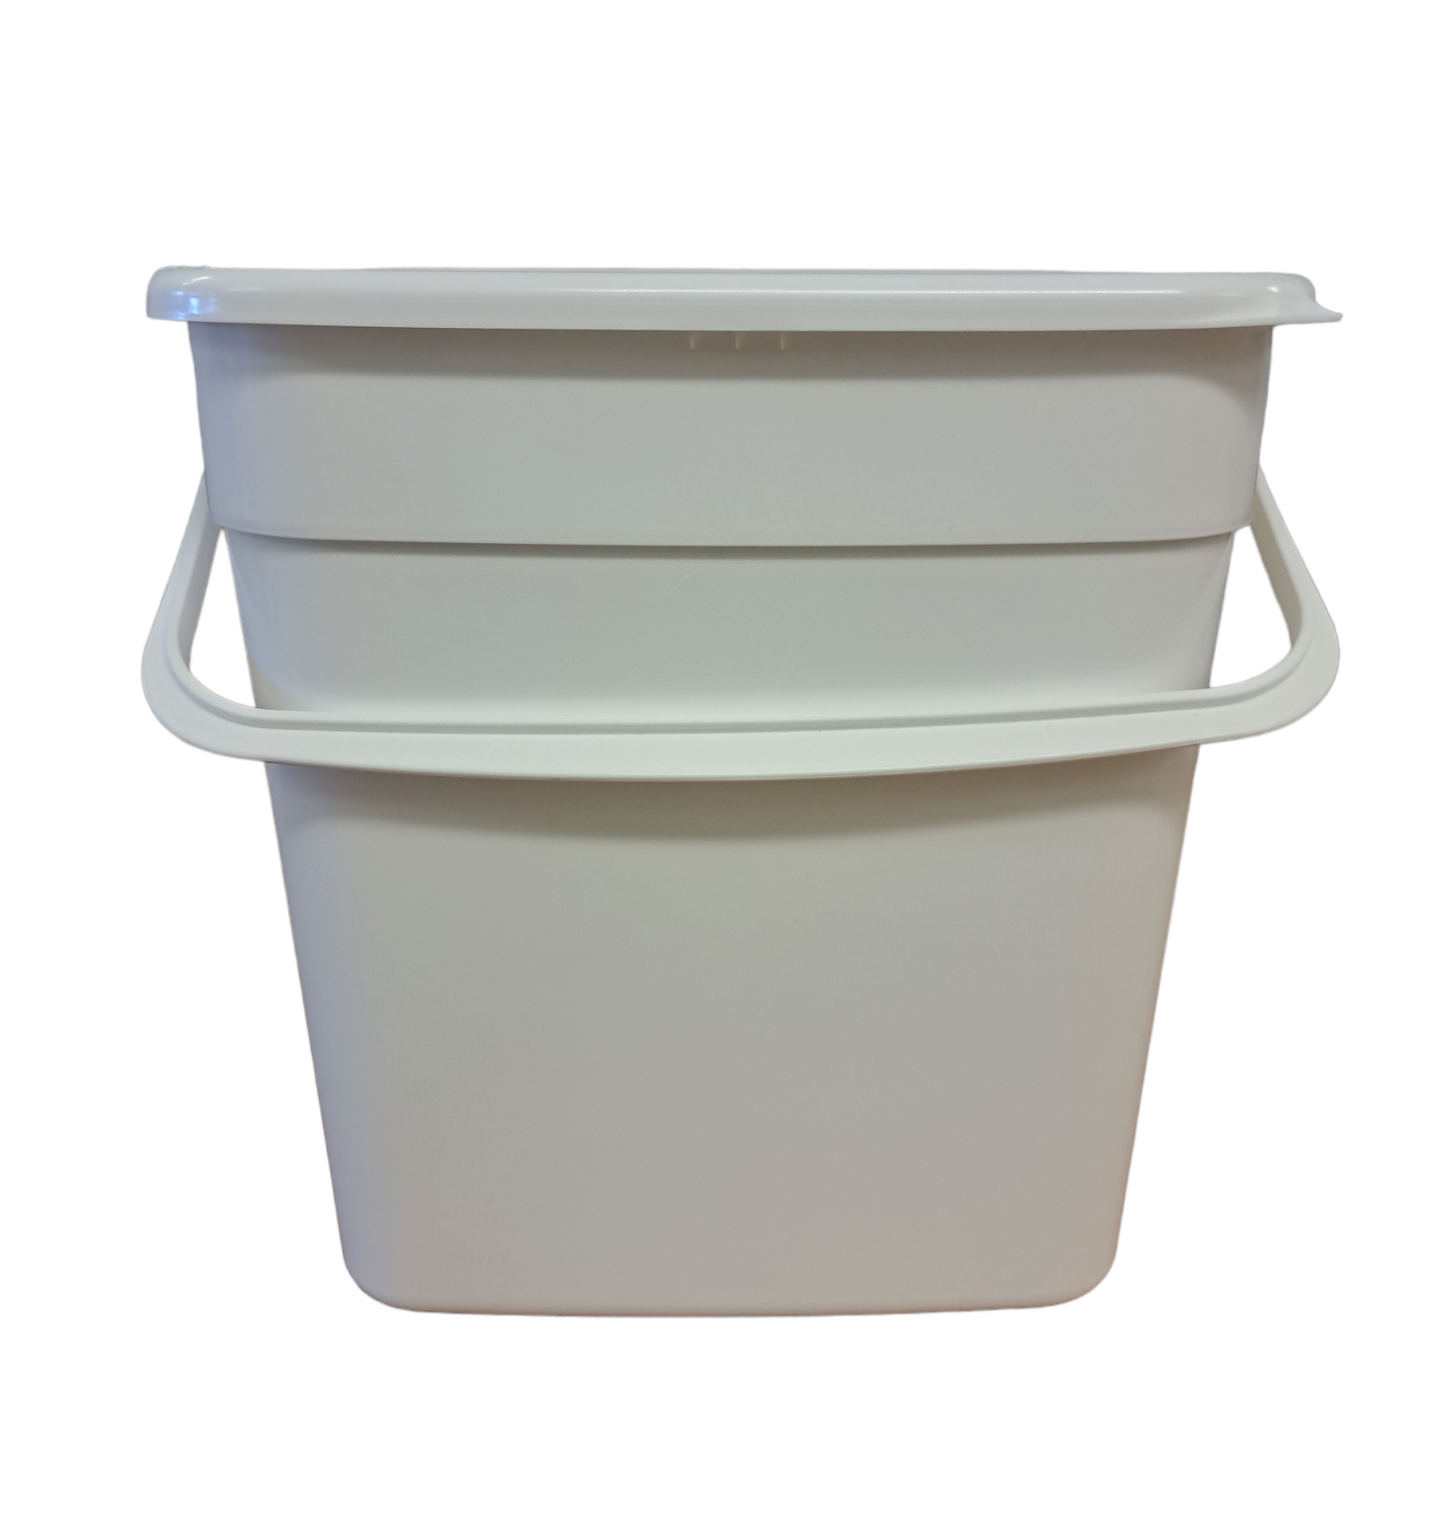 10 litre standard container with lid - White with handle